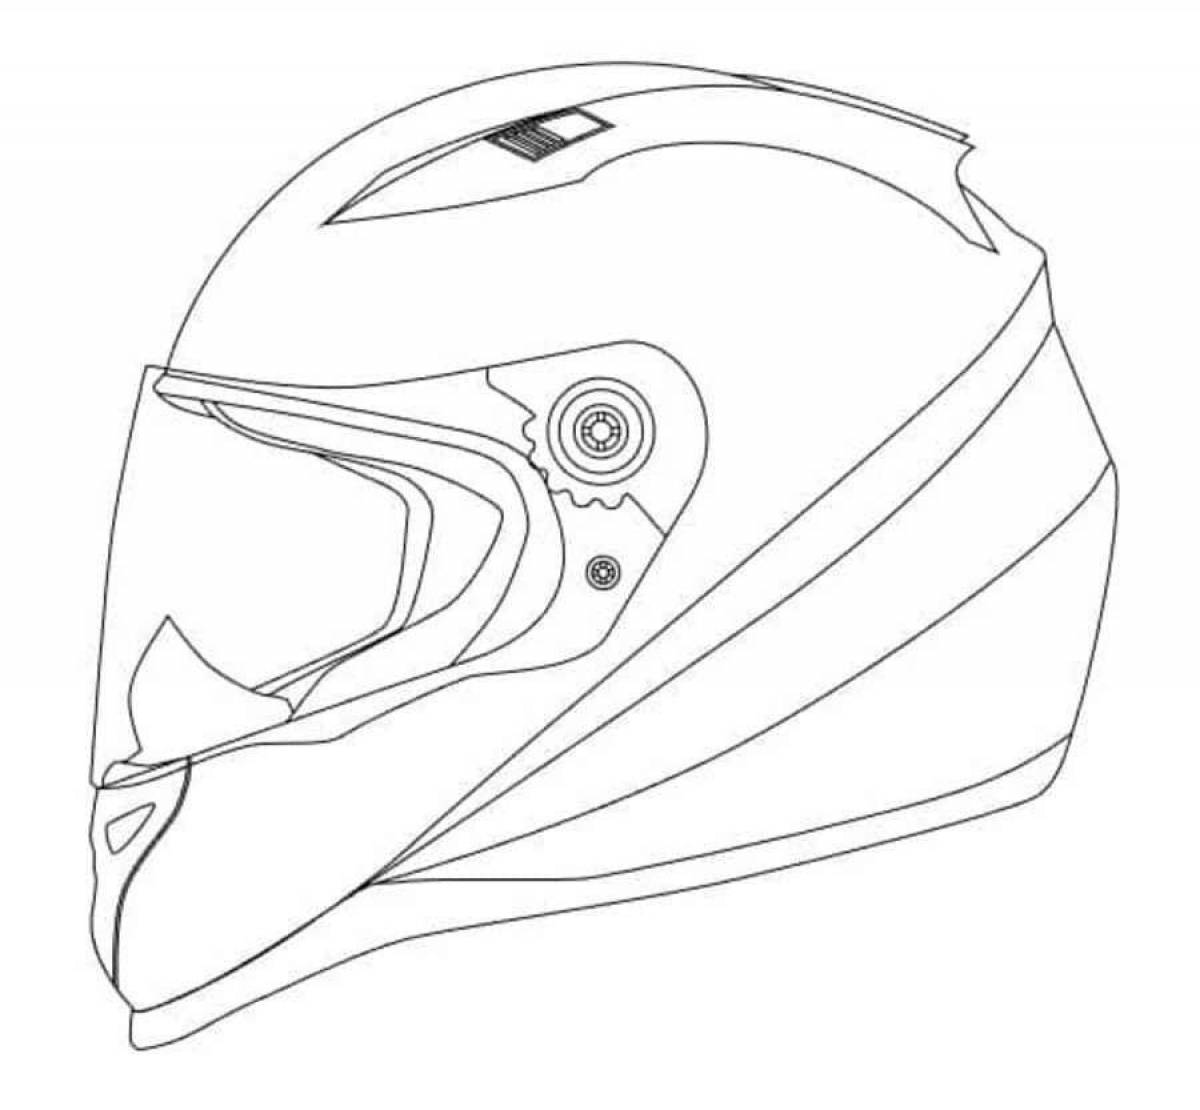 Coloring page with colorful helmet